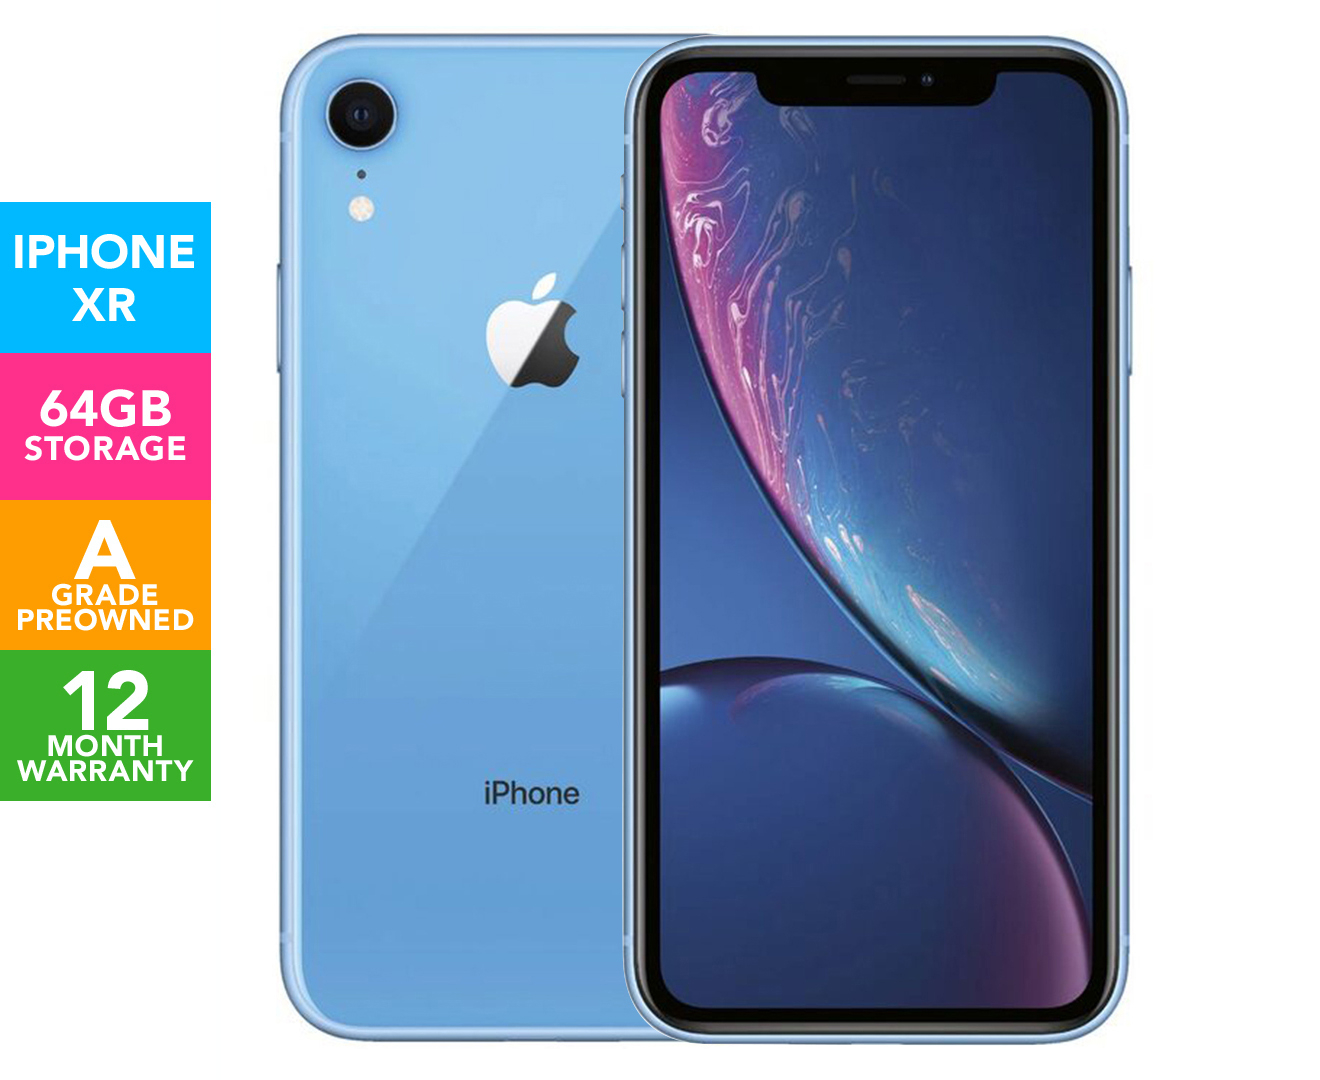 Pre-Owned Apple iPhone XR 64GB Smartphone Unlocked - Blue | Catch.co.nz